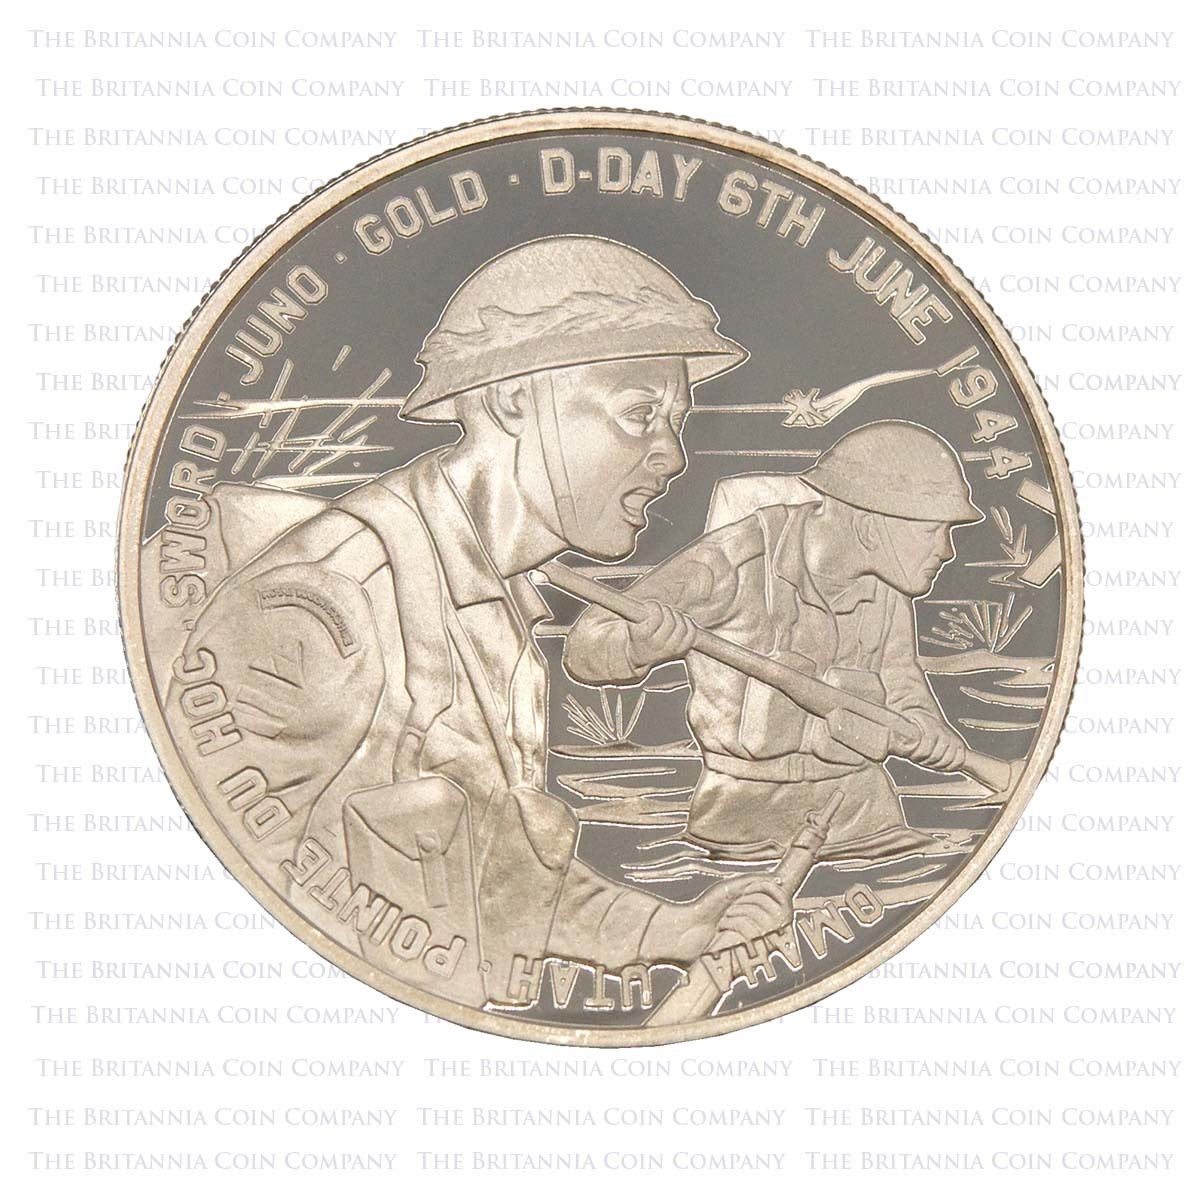 2014 Alderney D-Day 70th Anniversary £5 Silver Proof Reverse